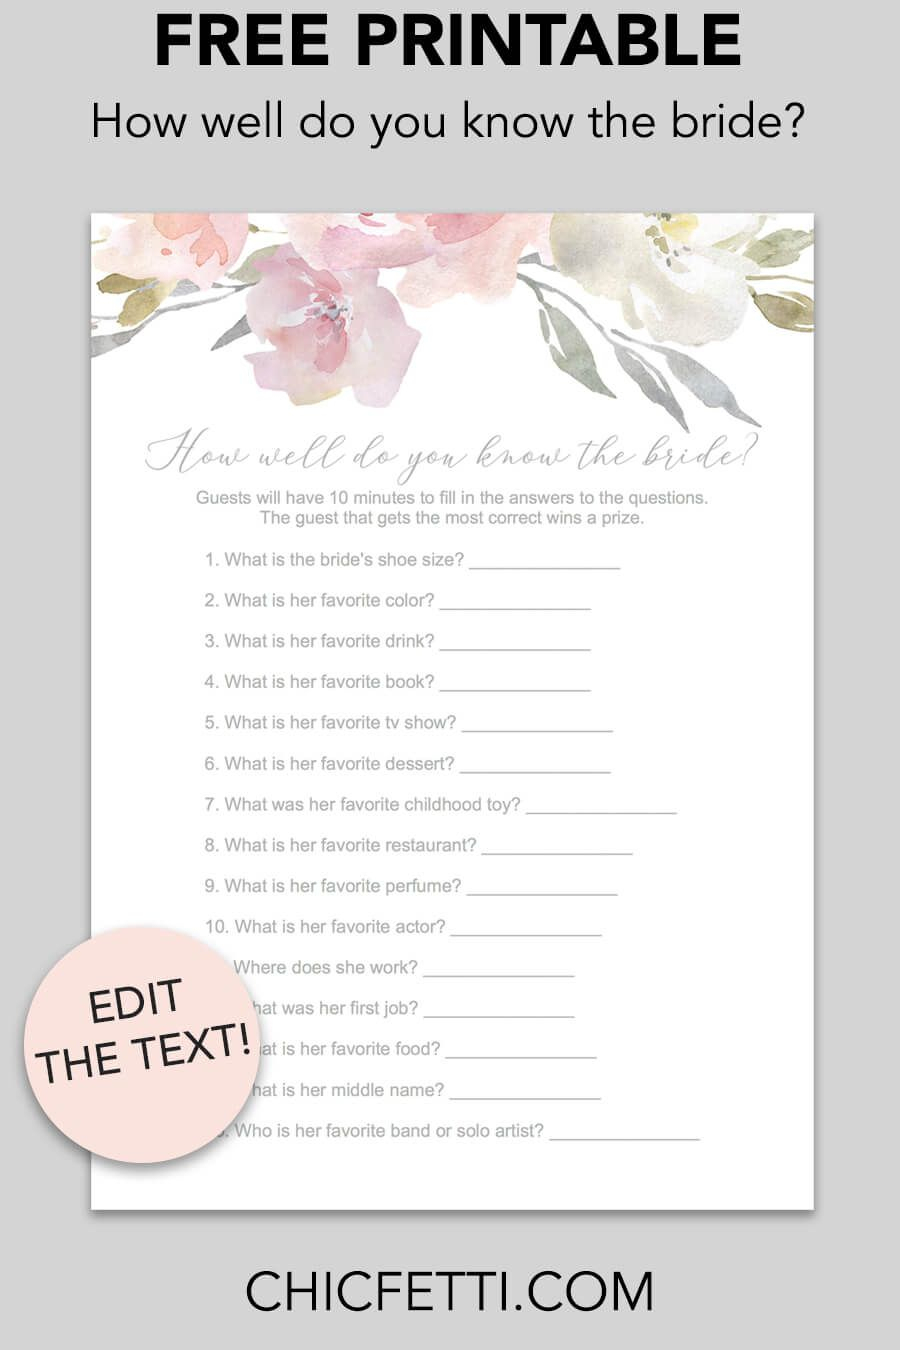 Free Printable How Well Do You Know The Bride Game Cards - Download - How Well Do You Know The Bride Game Free Printable